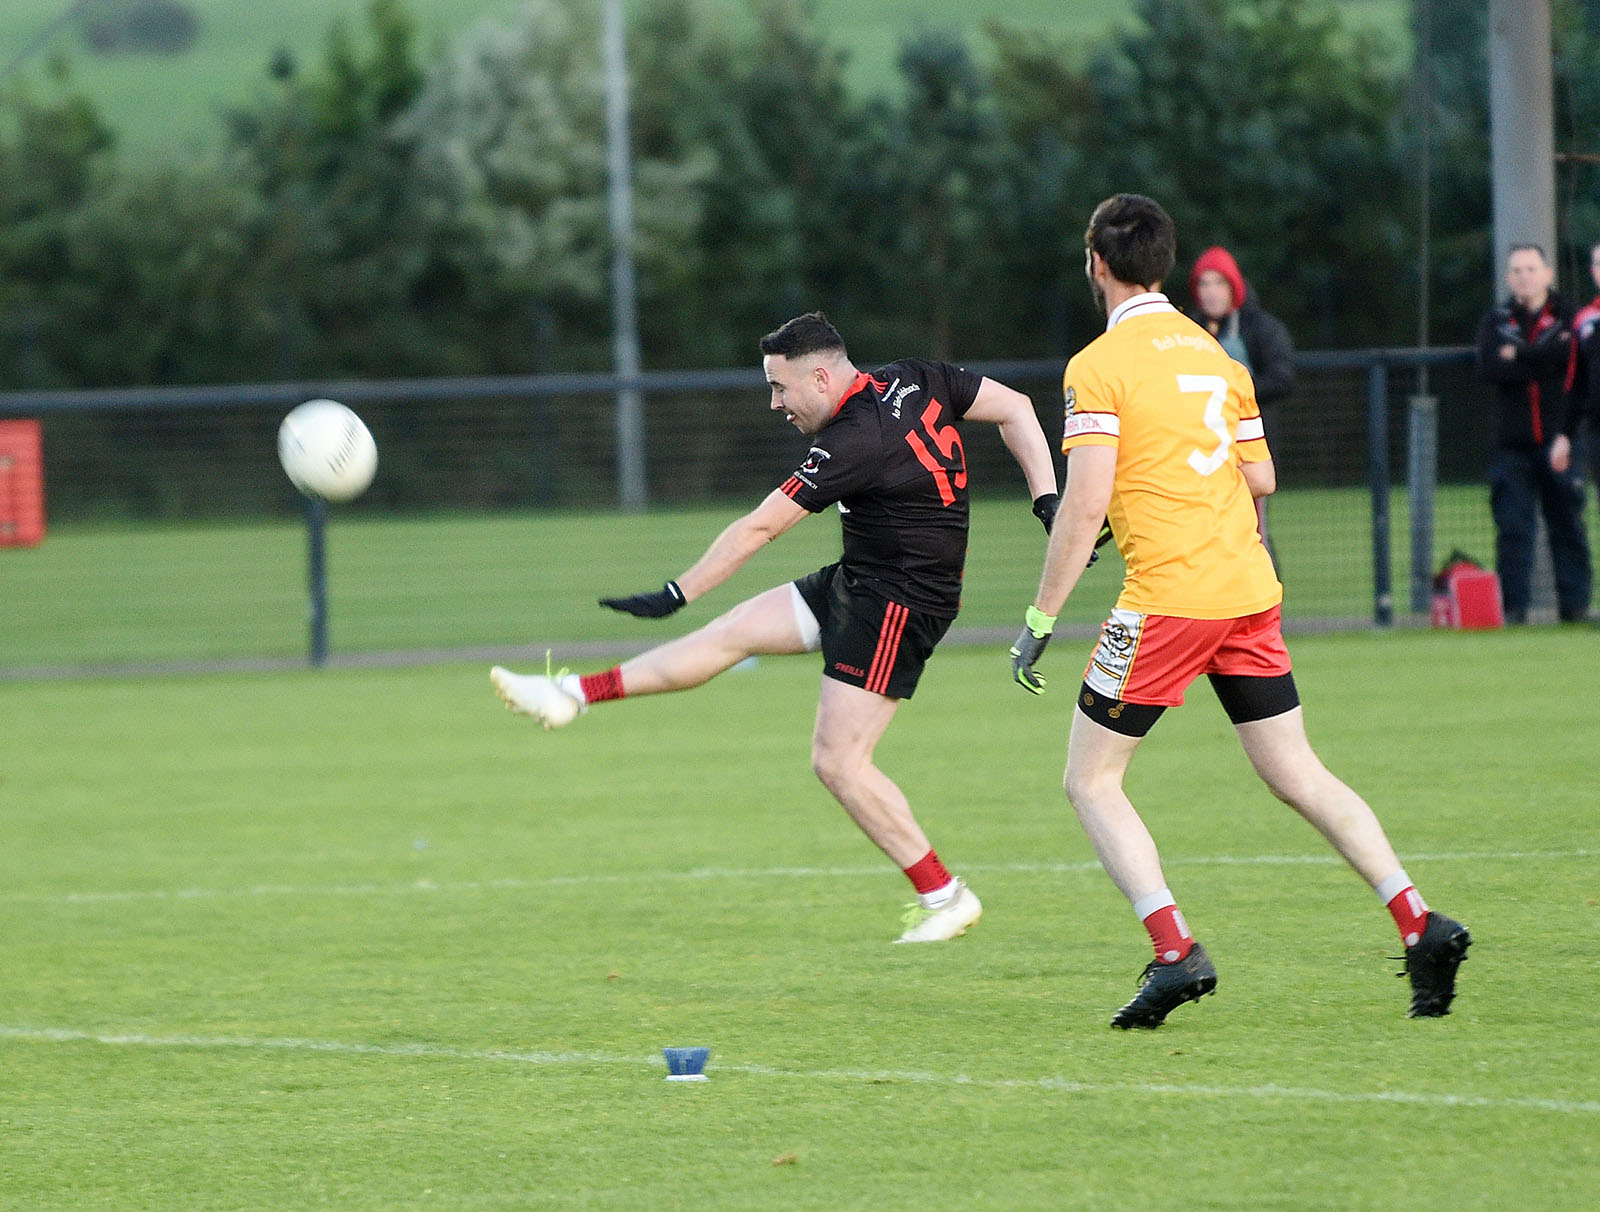 Championship experience is standing to Tattyreagh